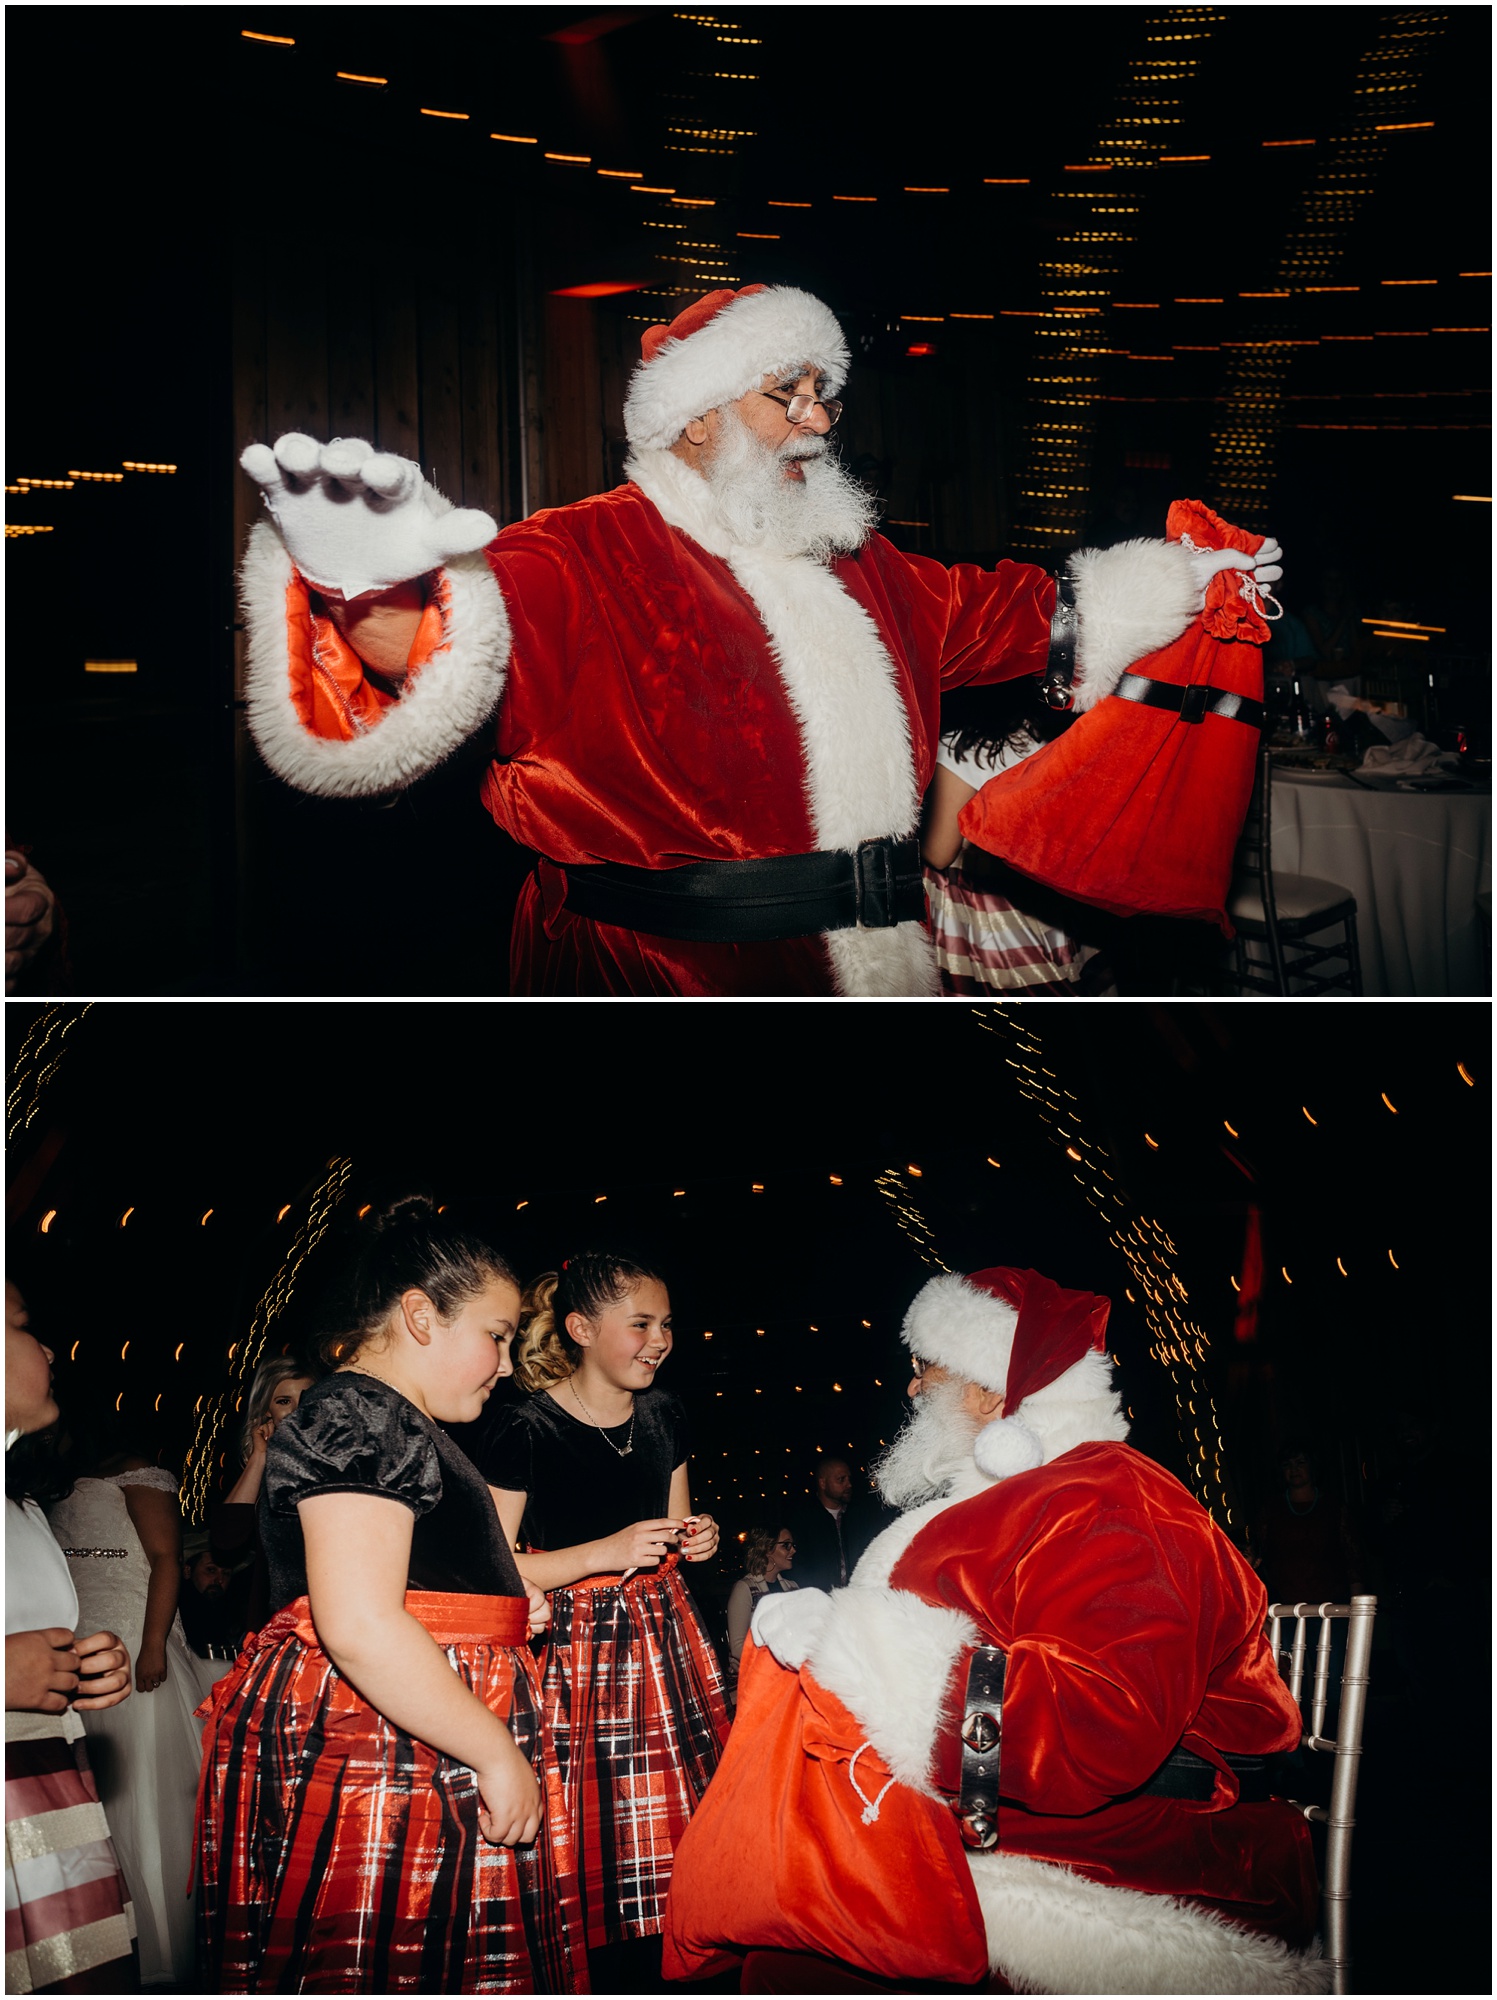 Santa Claus makes a surprise entrance during the reception for a Christmas Country Wedding in a Barn.